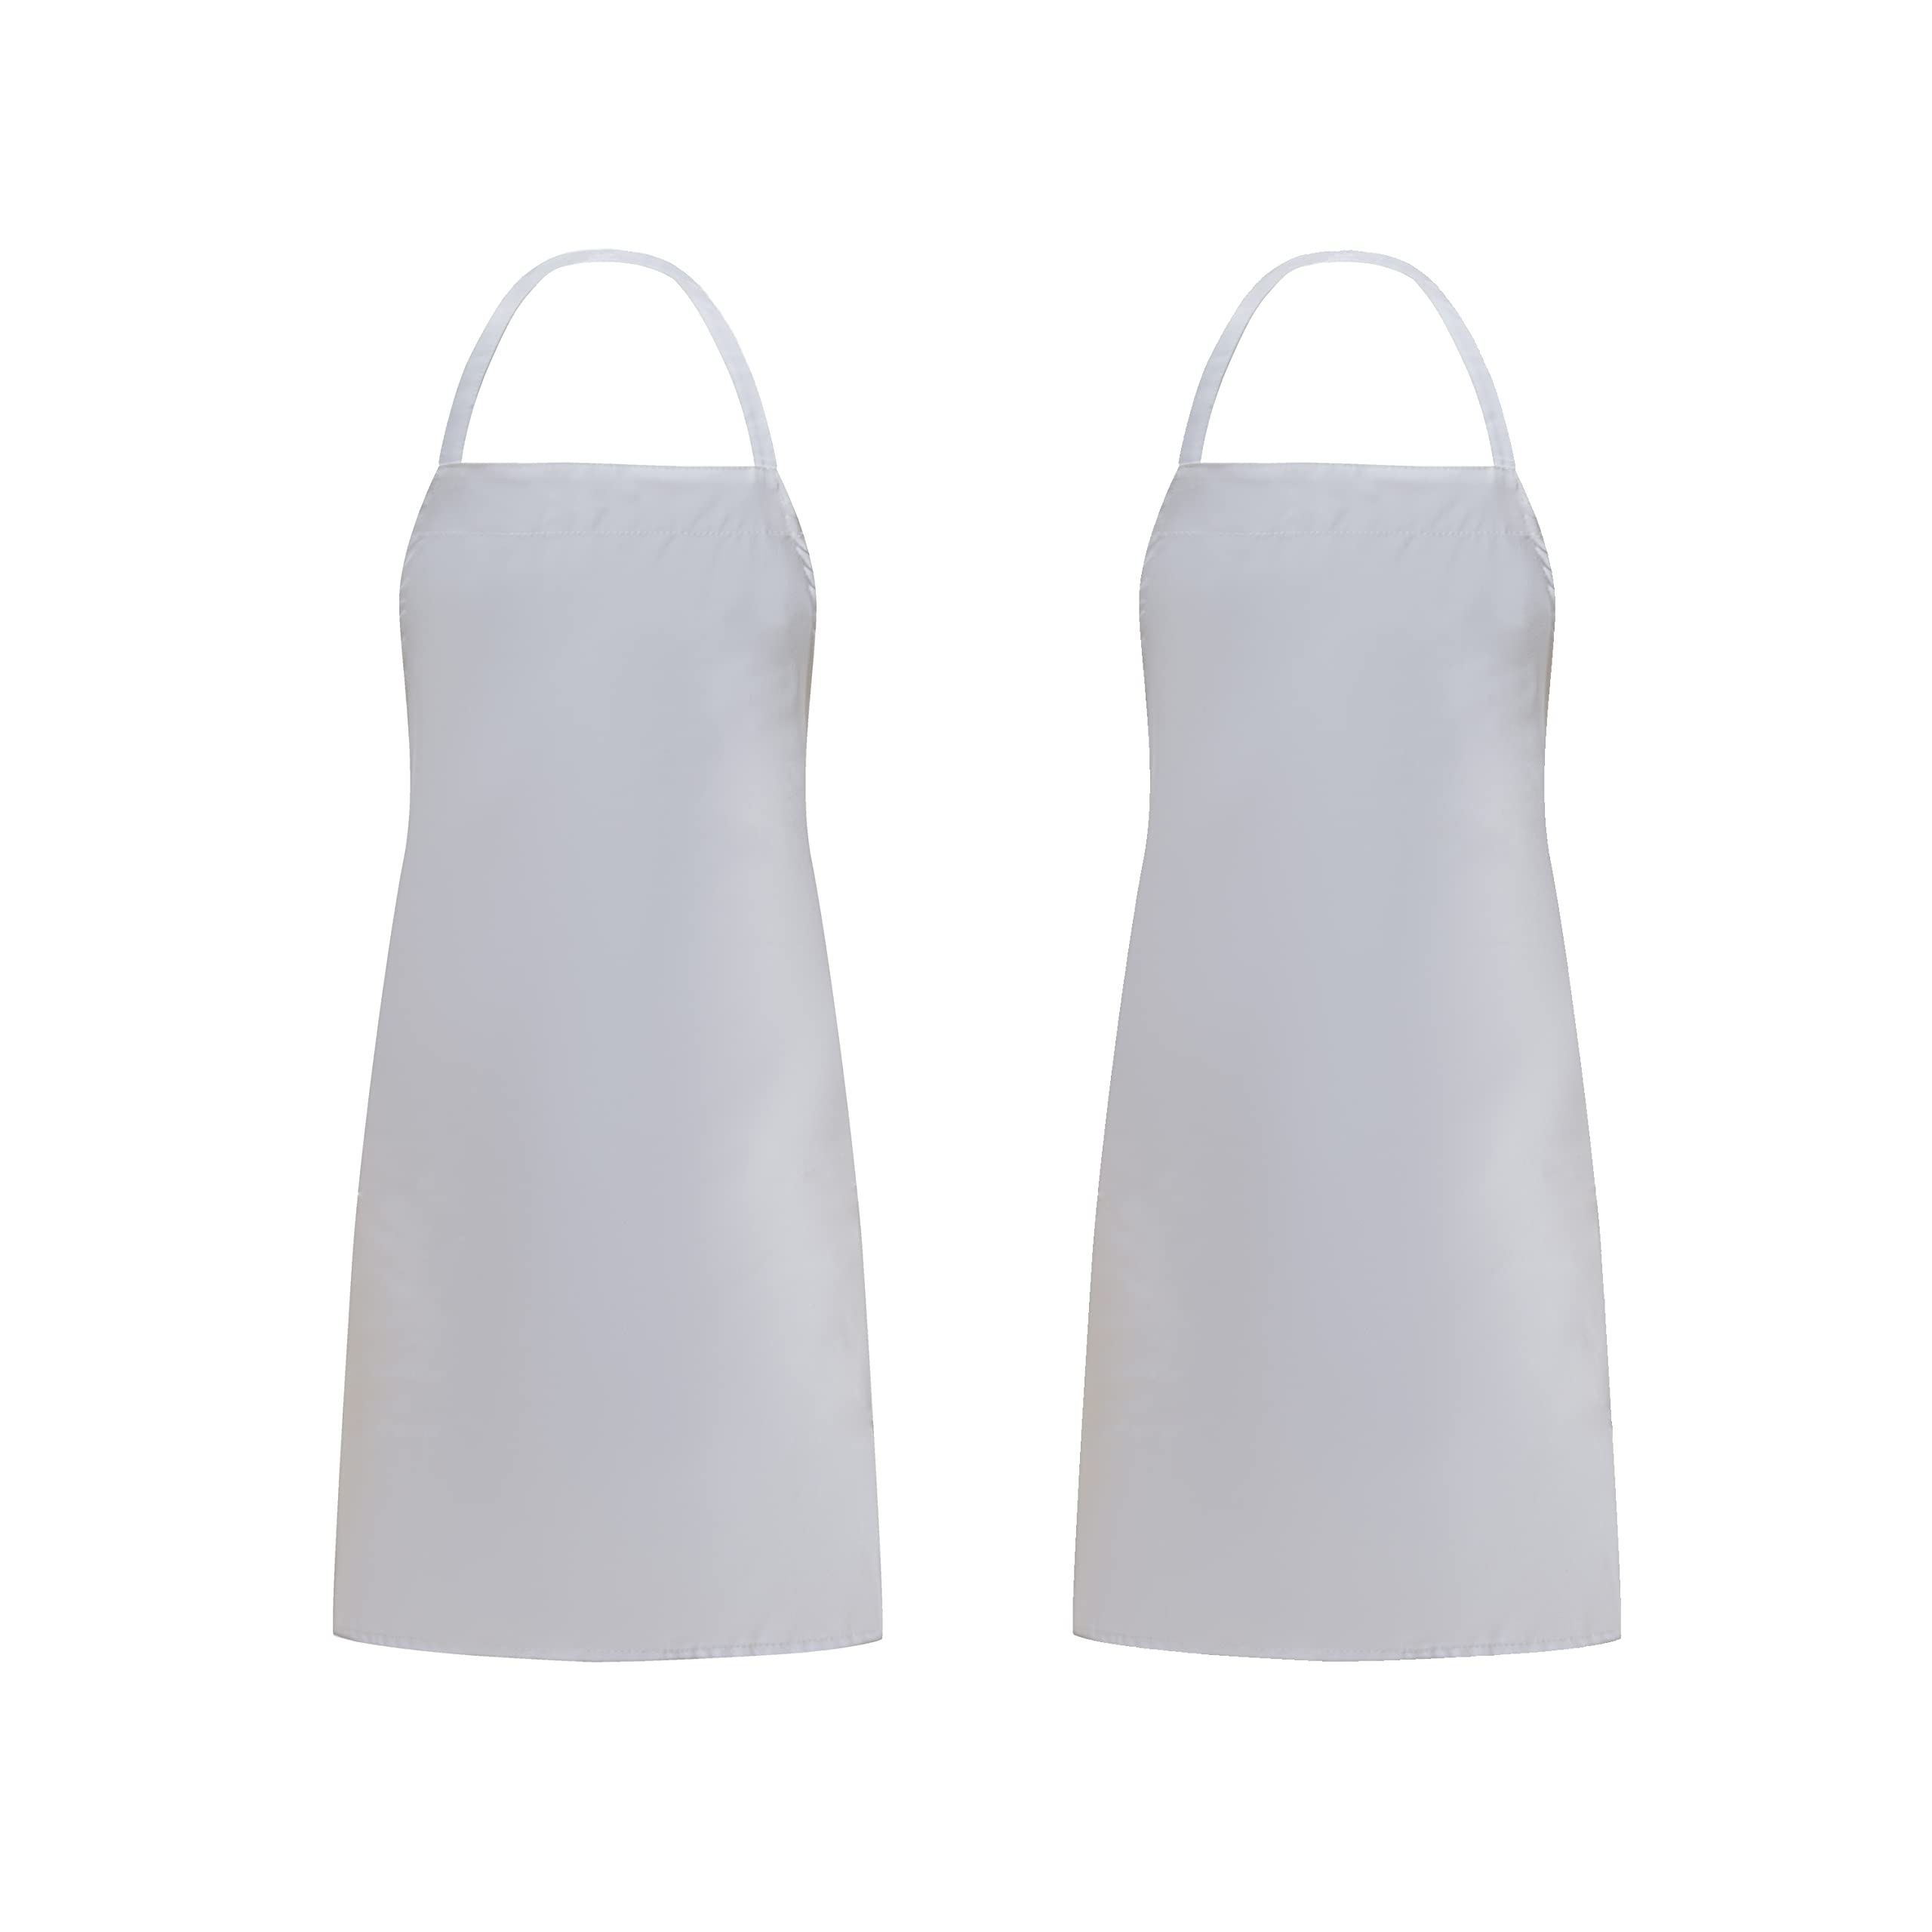 Weavric Unisex Bib Apron with No Pocket, White, 32x28 Inch with Long Ties for Women Men Chef, Kitchen, Crafting, Drawing, Pack of 2